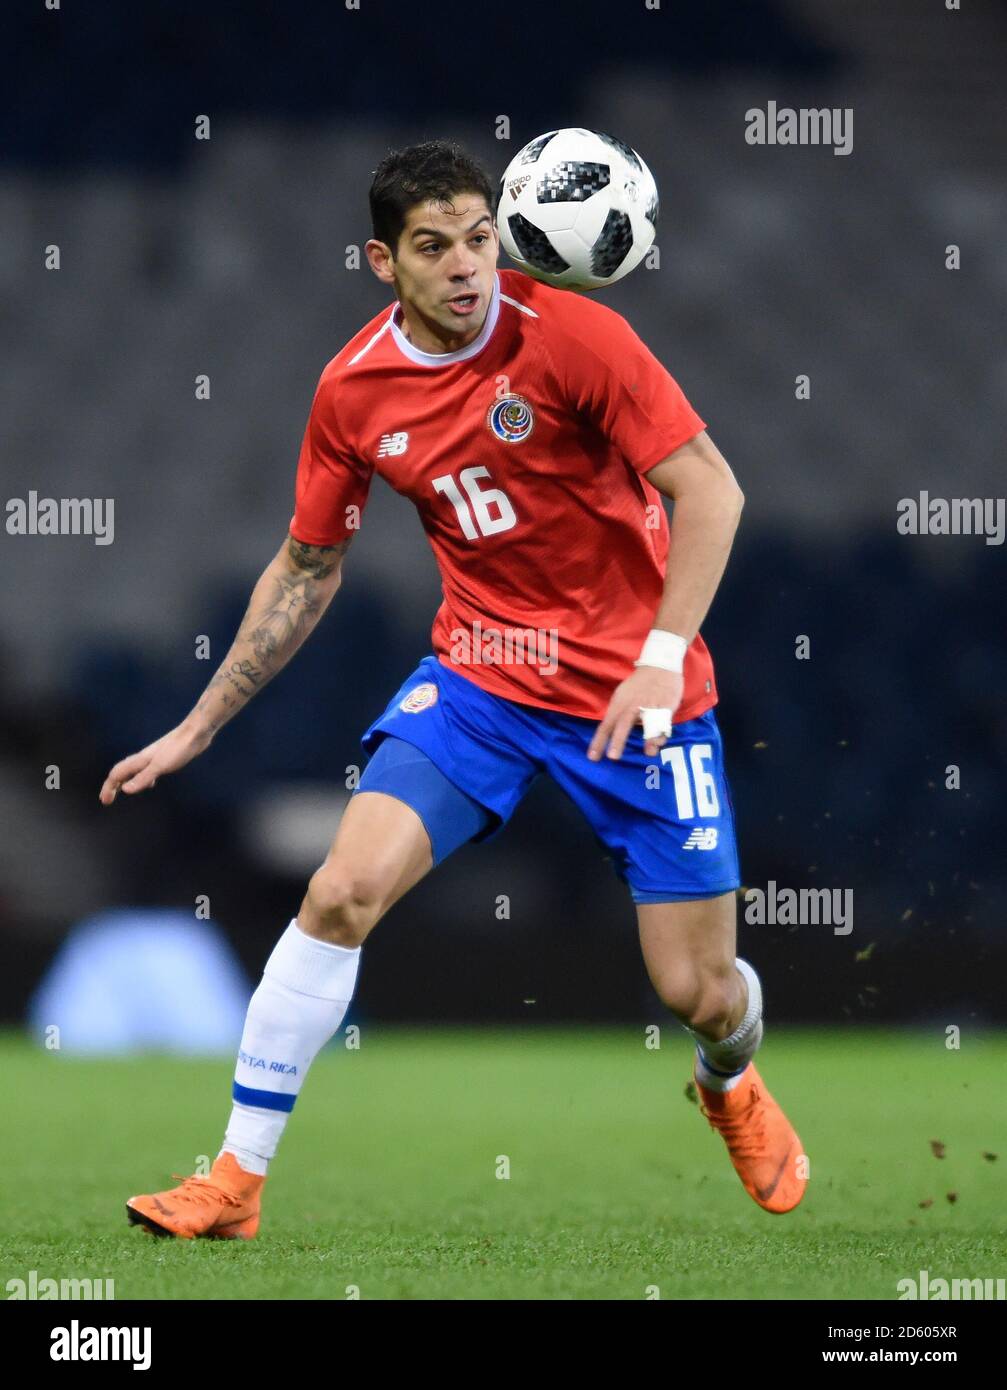 Costa Rica's Christian Gamboa in action during the international friendly match at Hampden Park, Glasgow Stock Photo